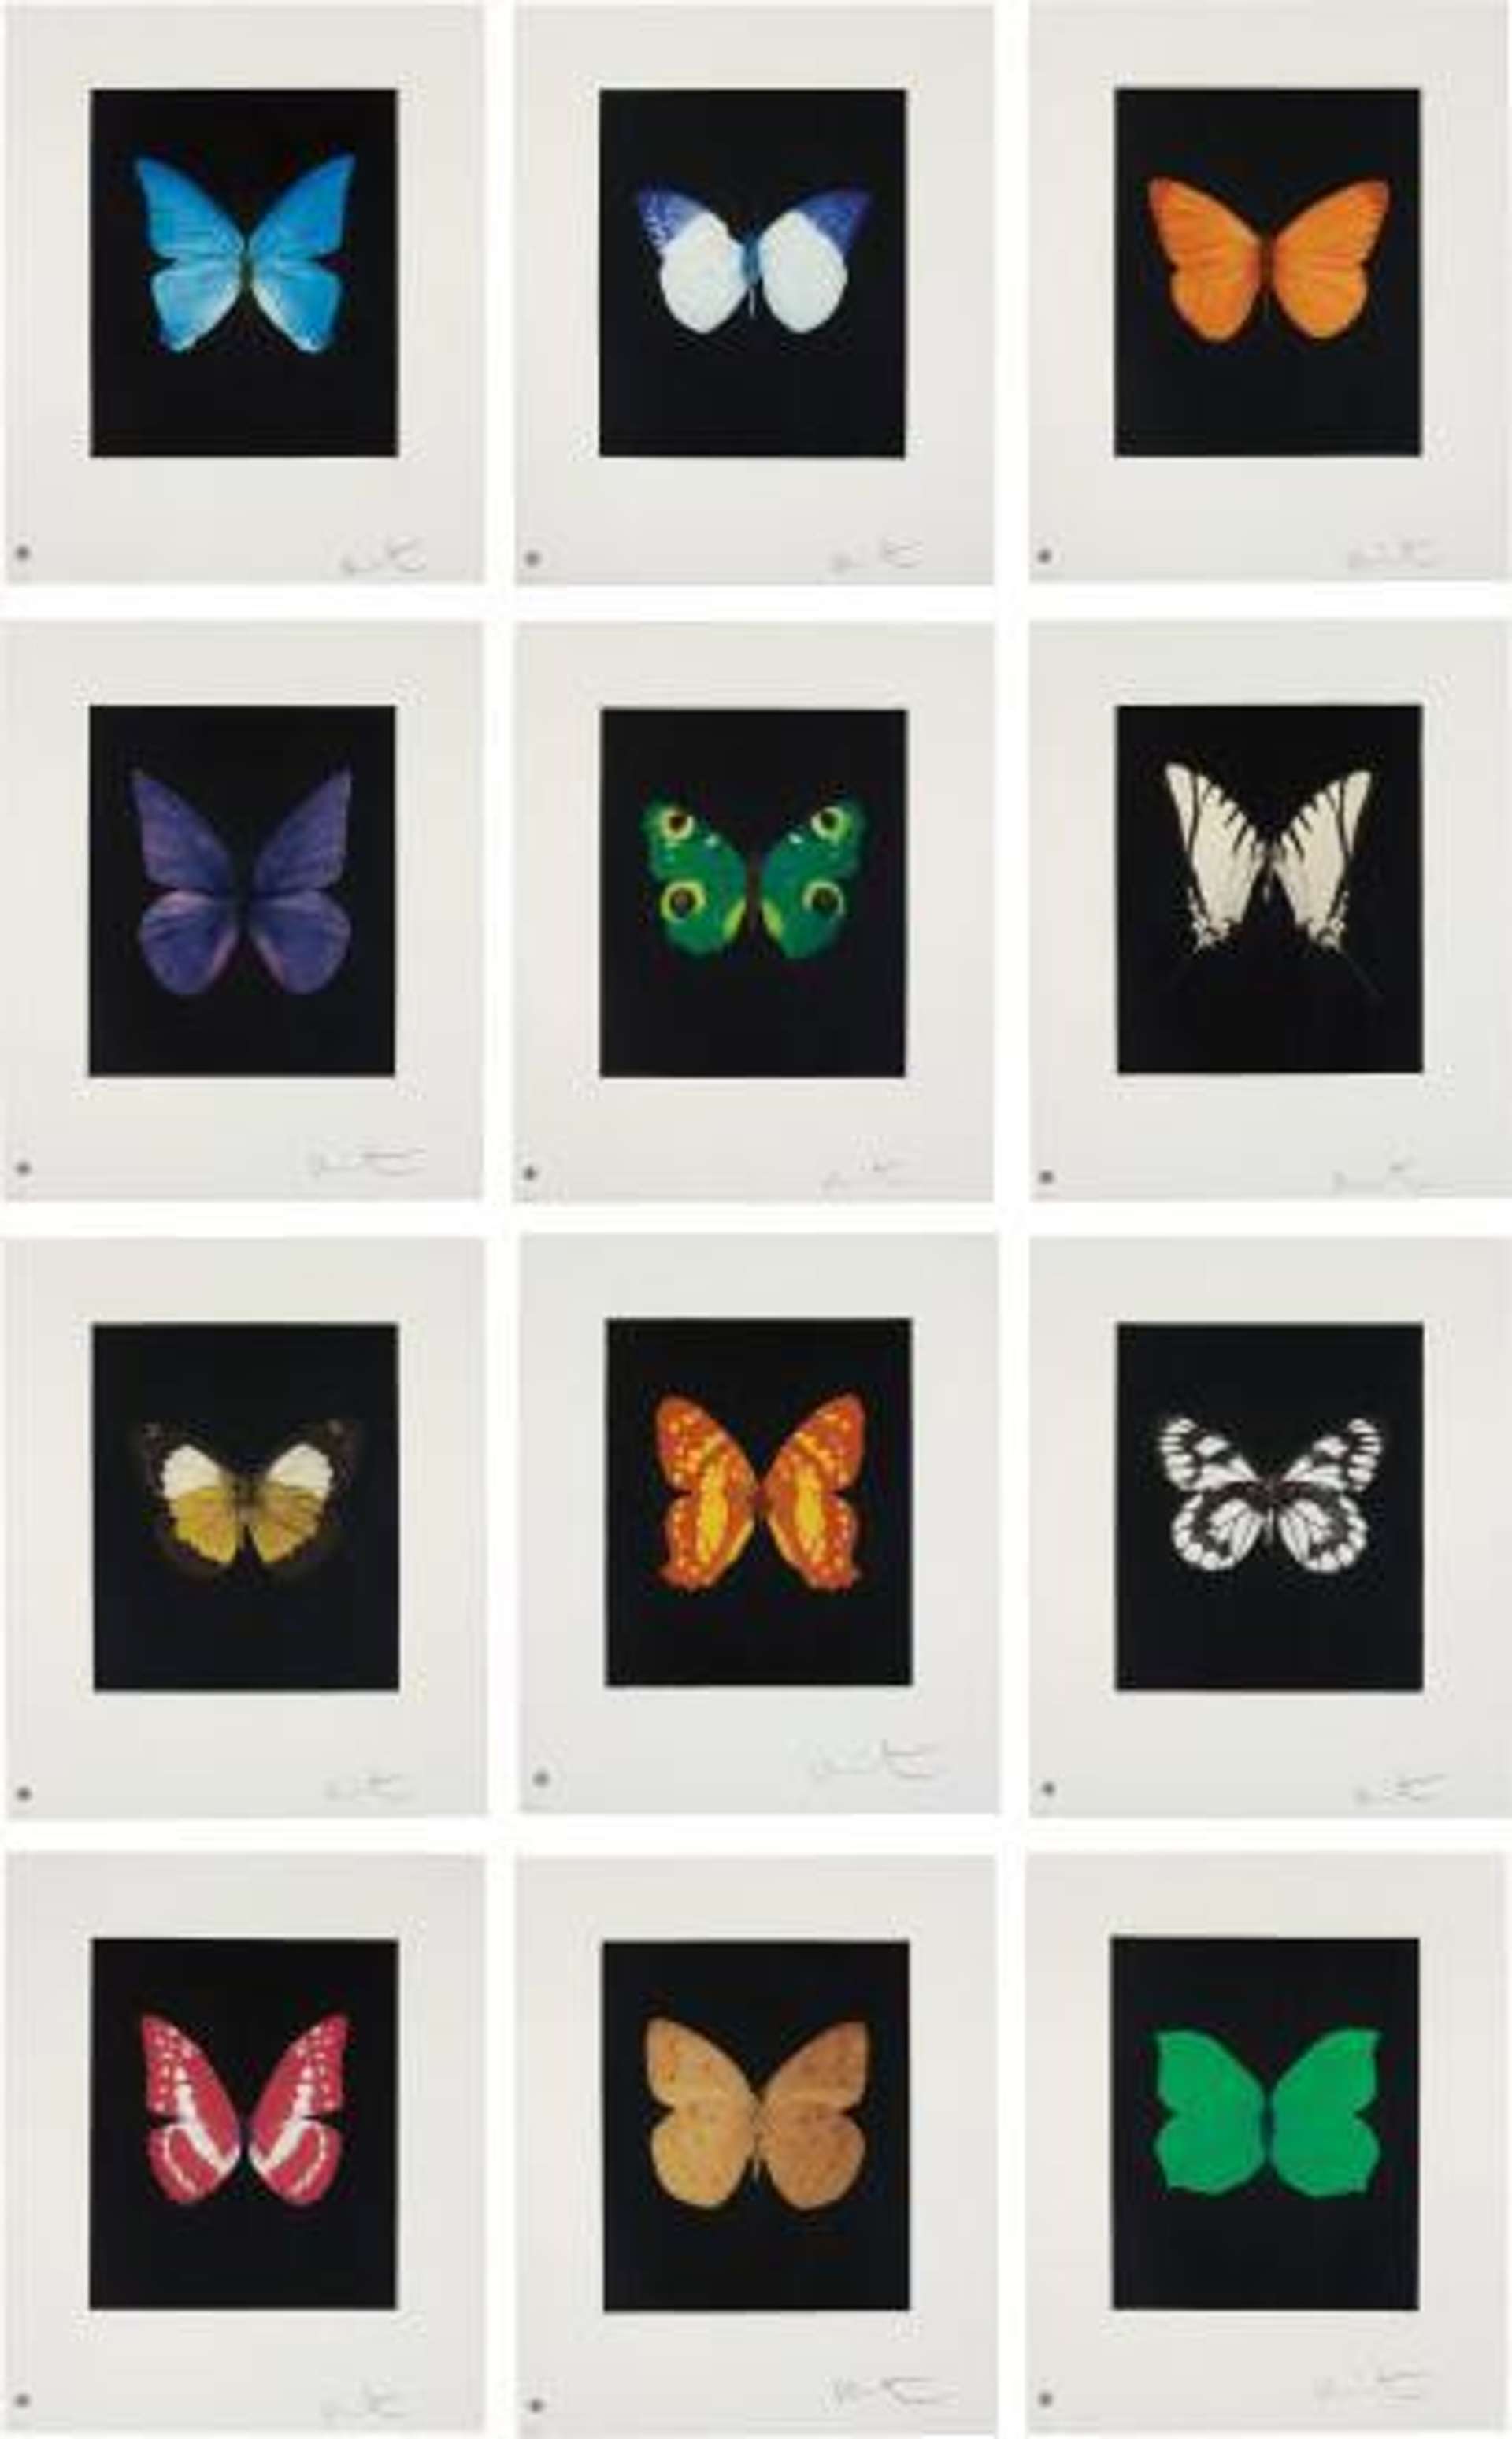 Damien Hirst: Butterfly Etching (complete set) - Signed Print